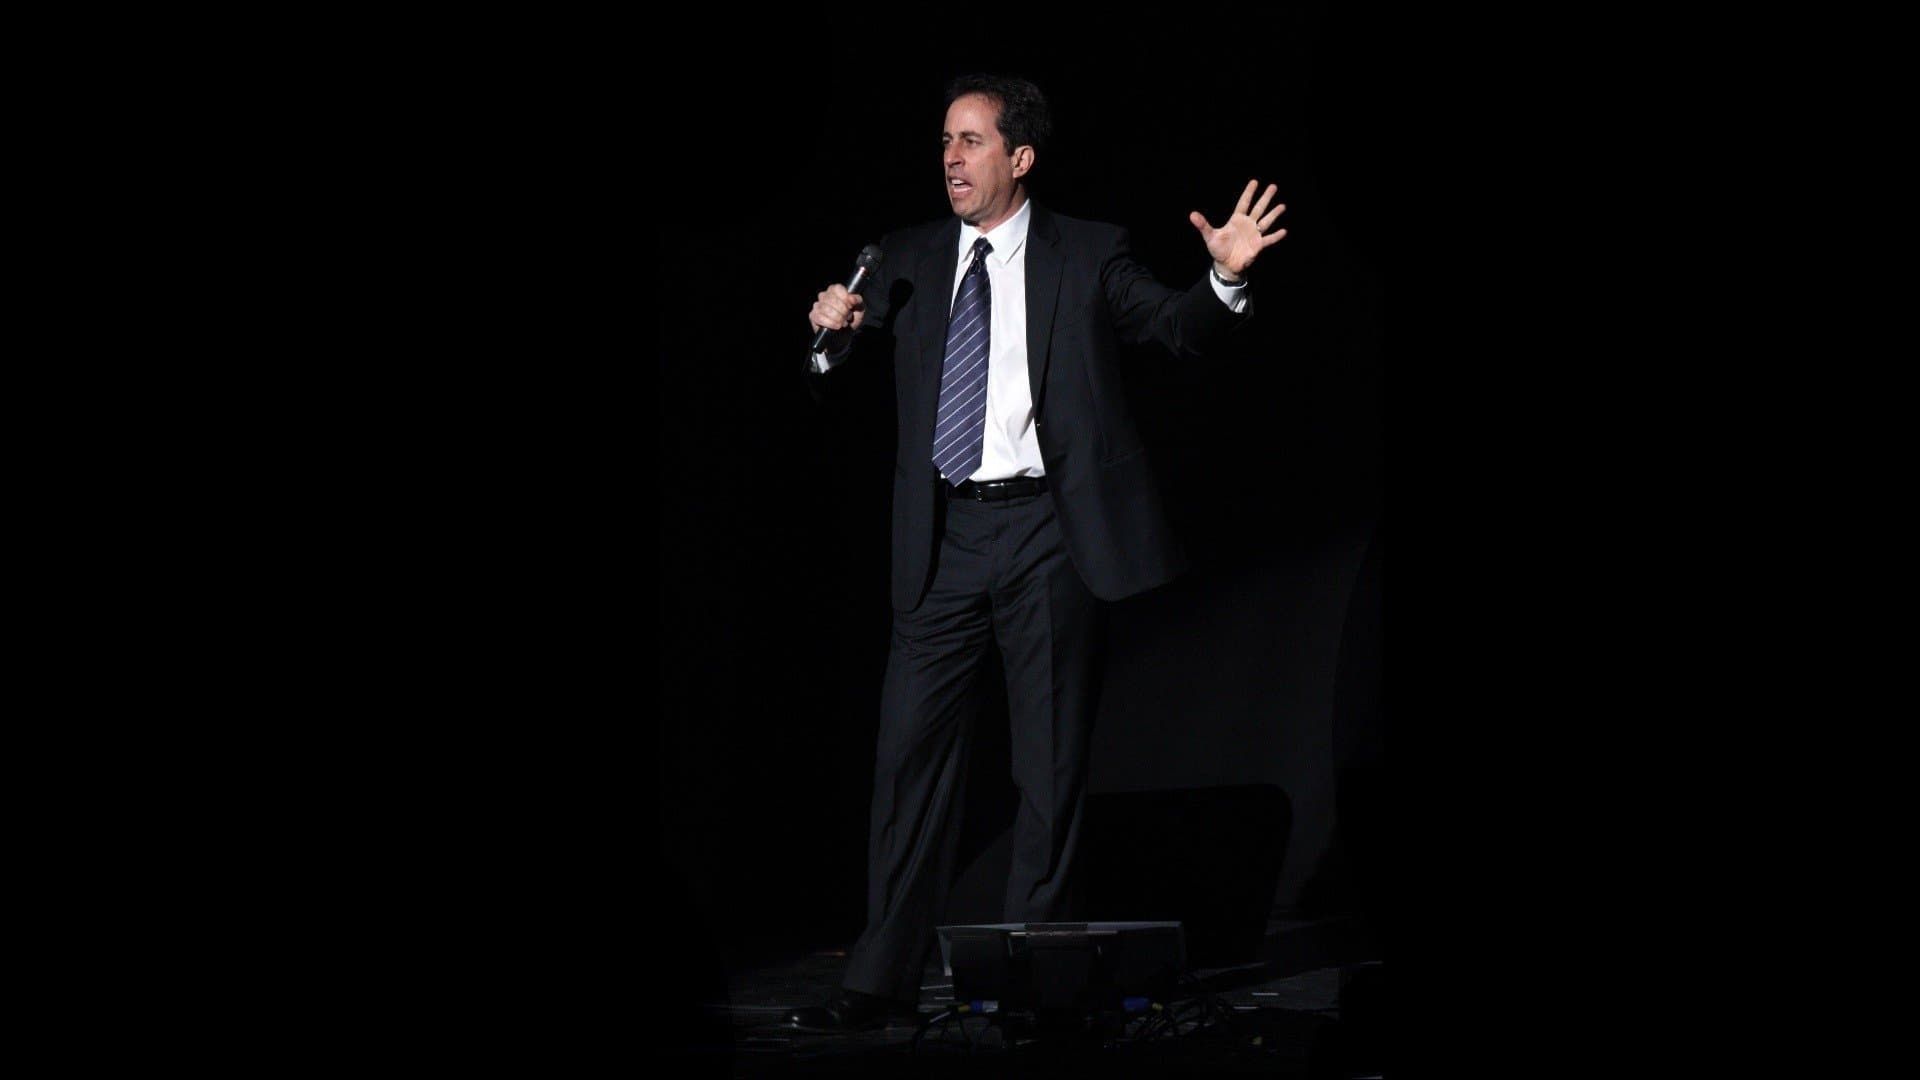 Jerry Seinfeld: 'I'm Telling You for the Last Time' background